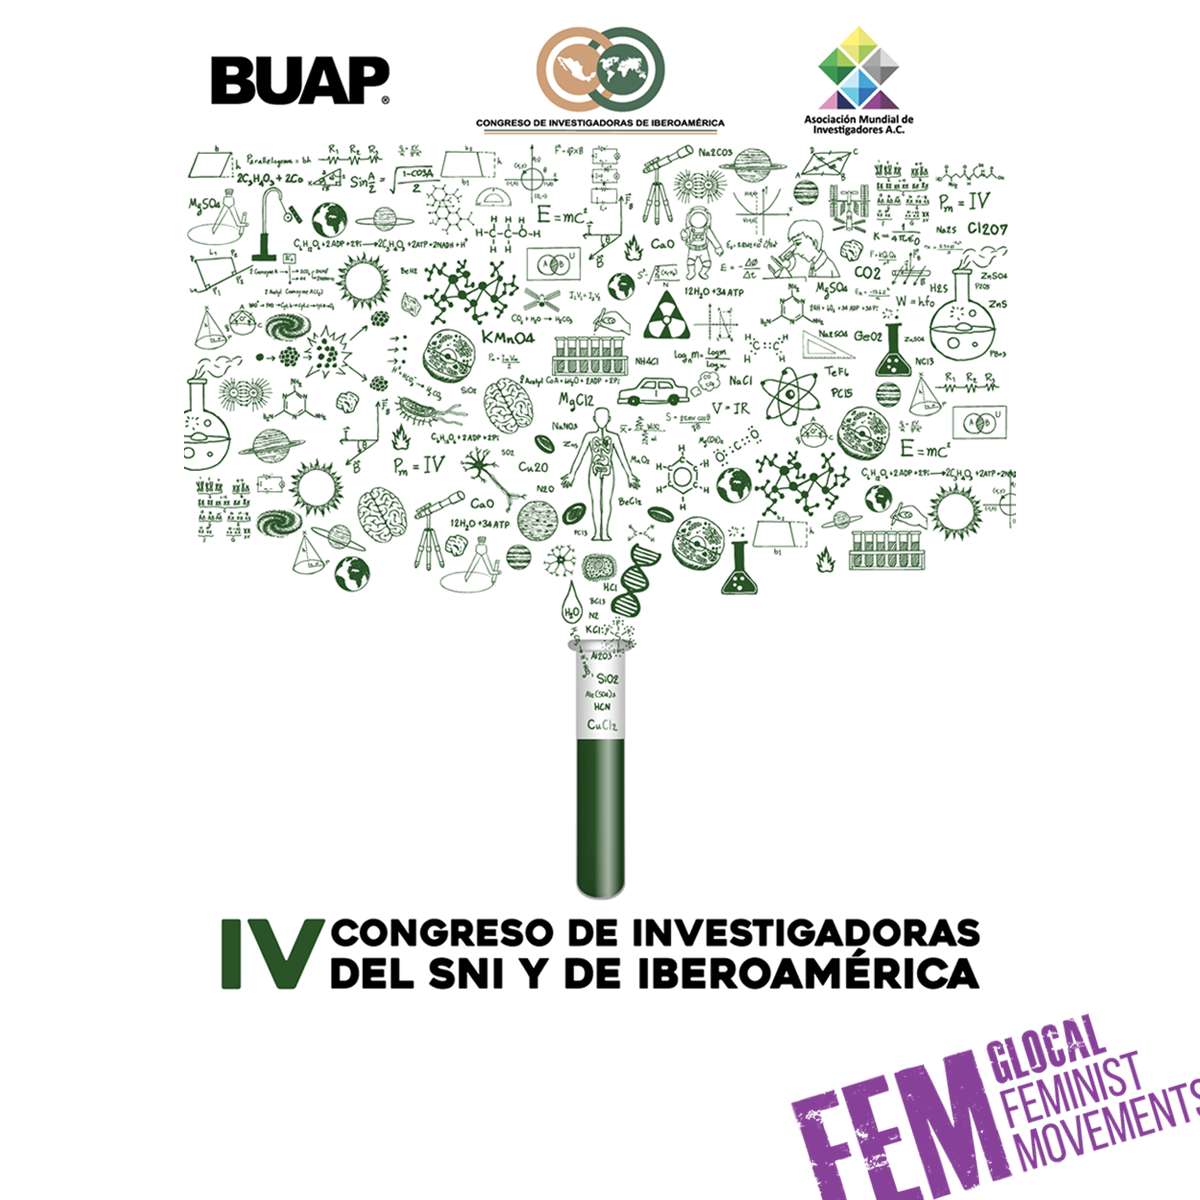 Glocal Feminism in Cyberspace: the 8M movement between Brazil and Portugal